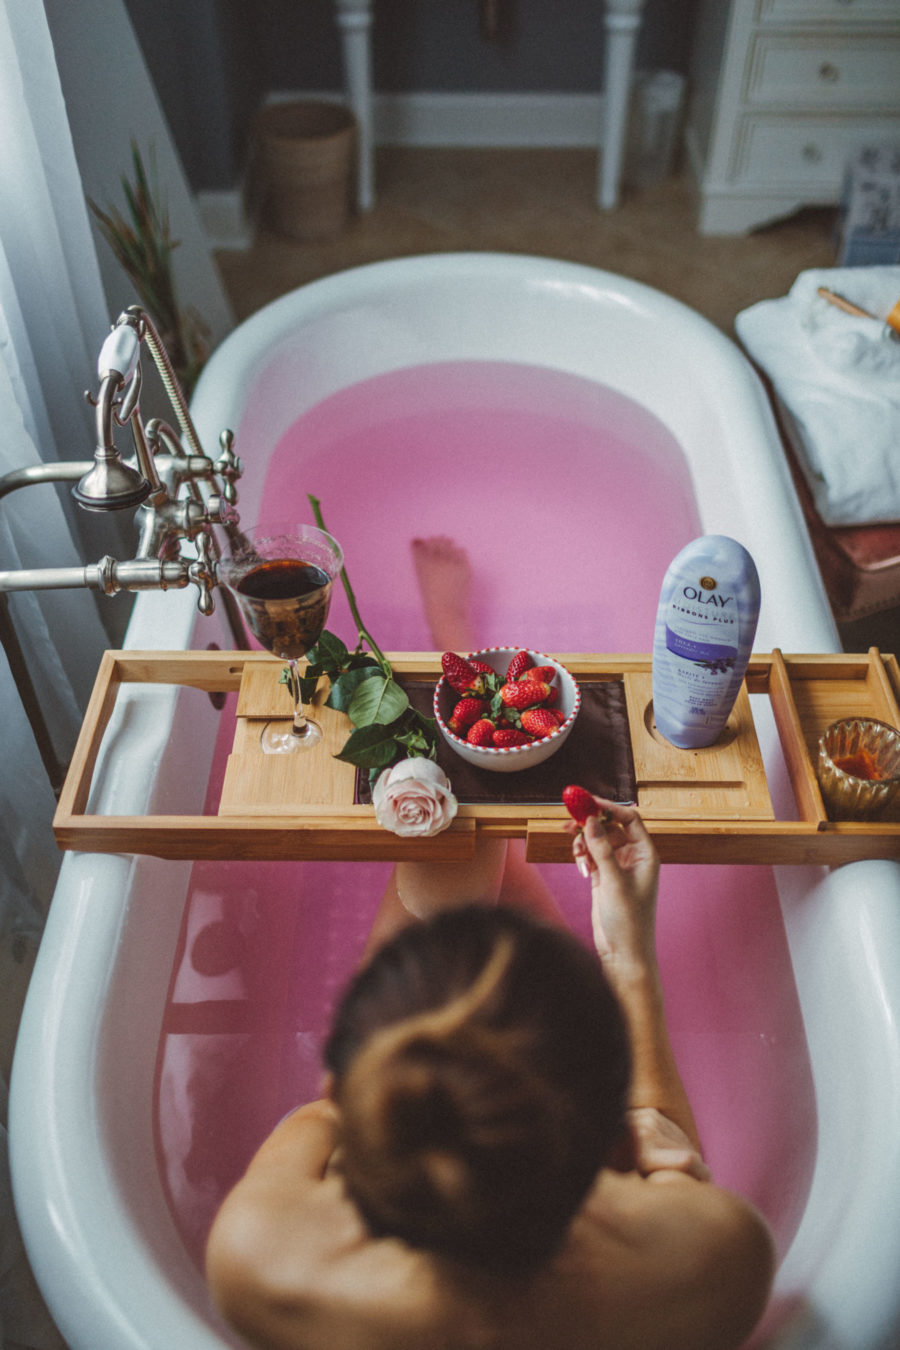 fashion blogger jessica wang shares her self-care guide at home in a pink bath // Jessica Wang -Notjessfashion.com